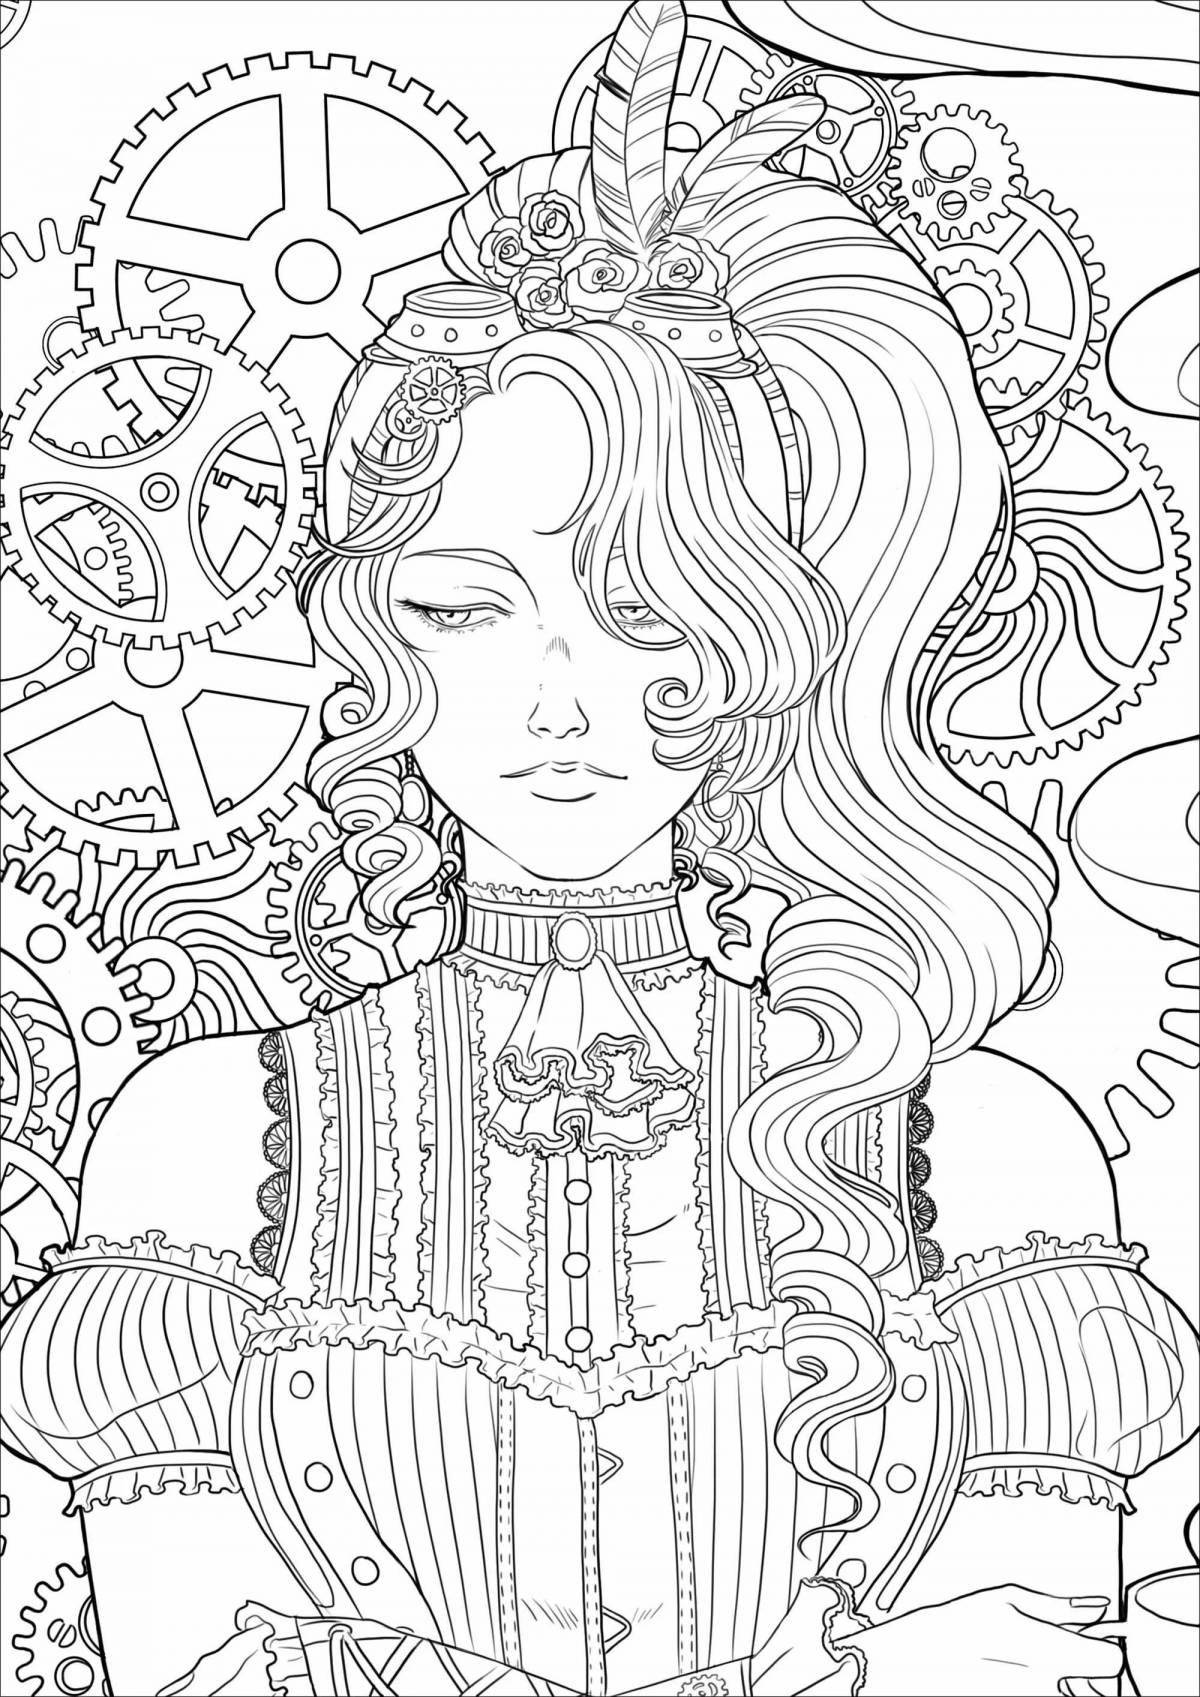 Exciting anti-stress coloring book for women